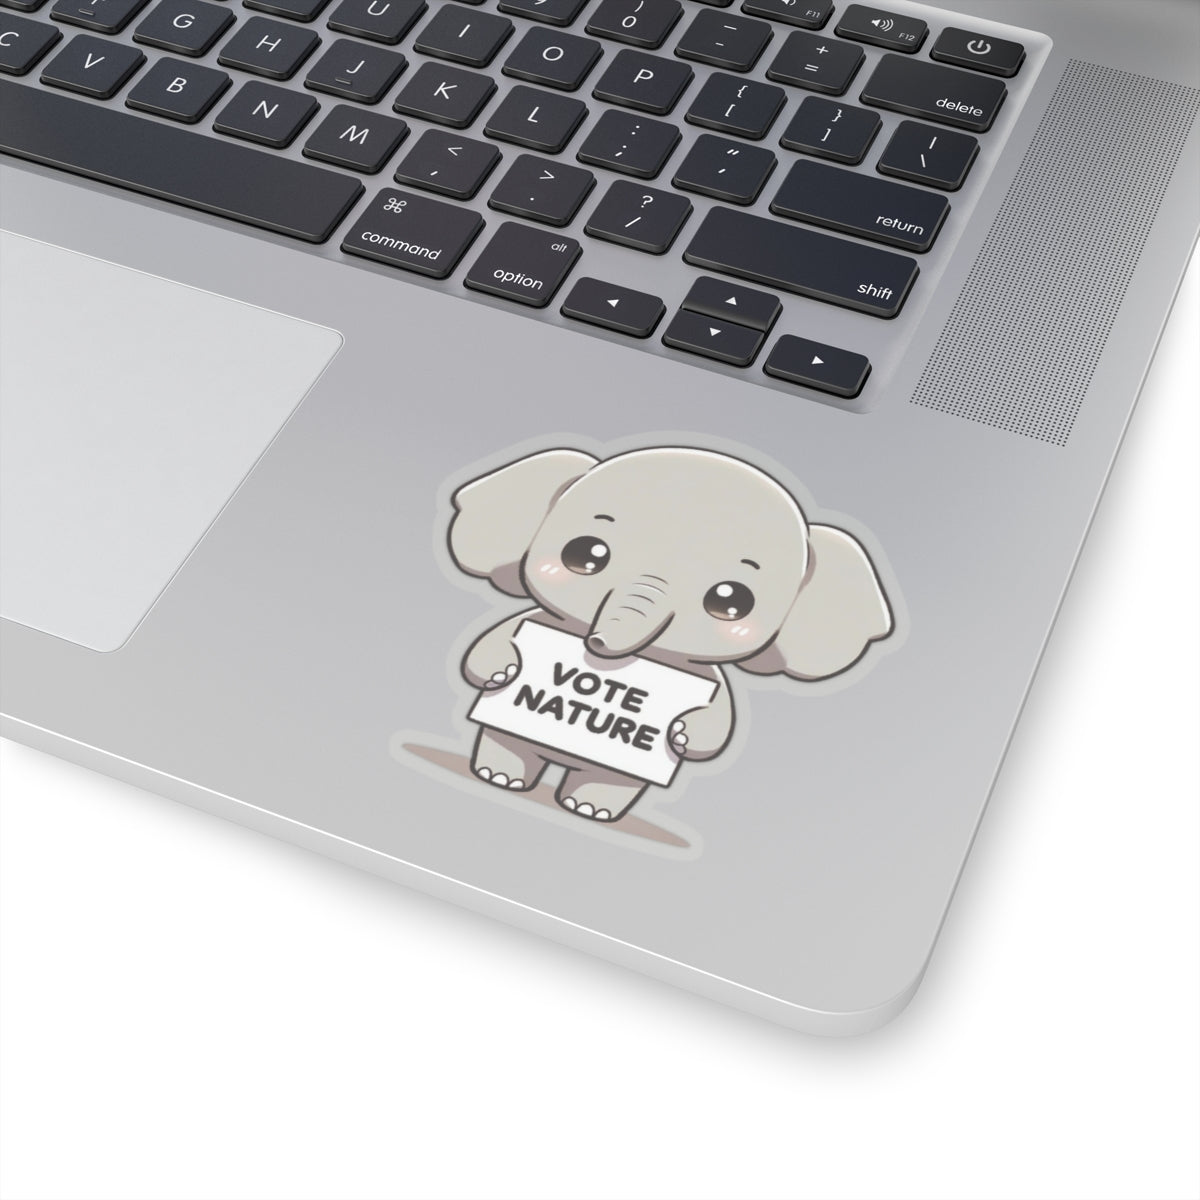 Inspirational Cute Elephant Statement vinyl Sticker: Vote Nature! for laptop, kindle, phone, ipad, instrument case, notebook, mood board